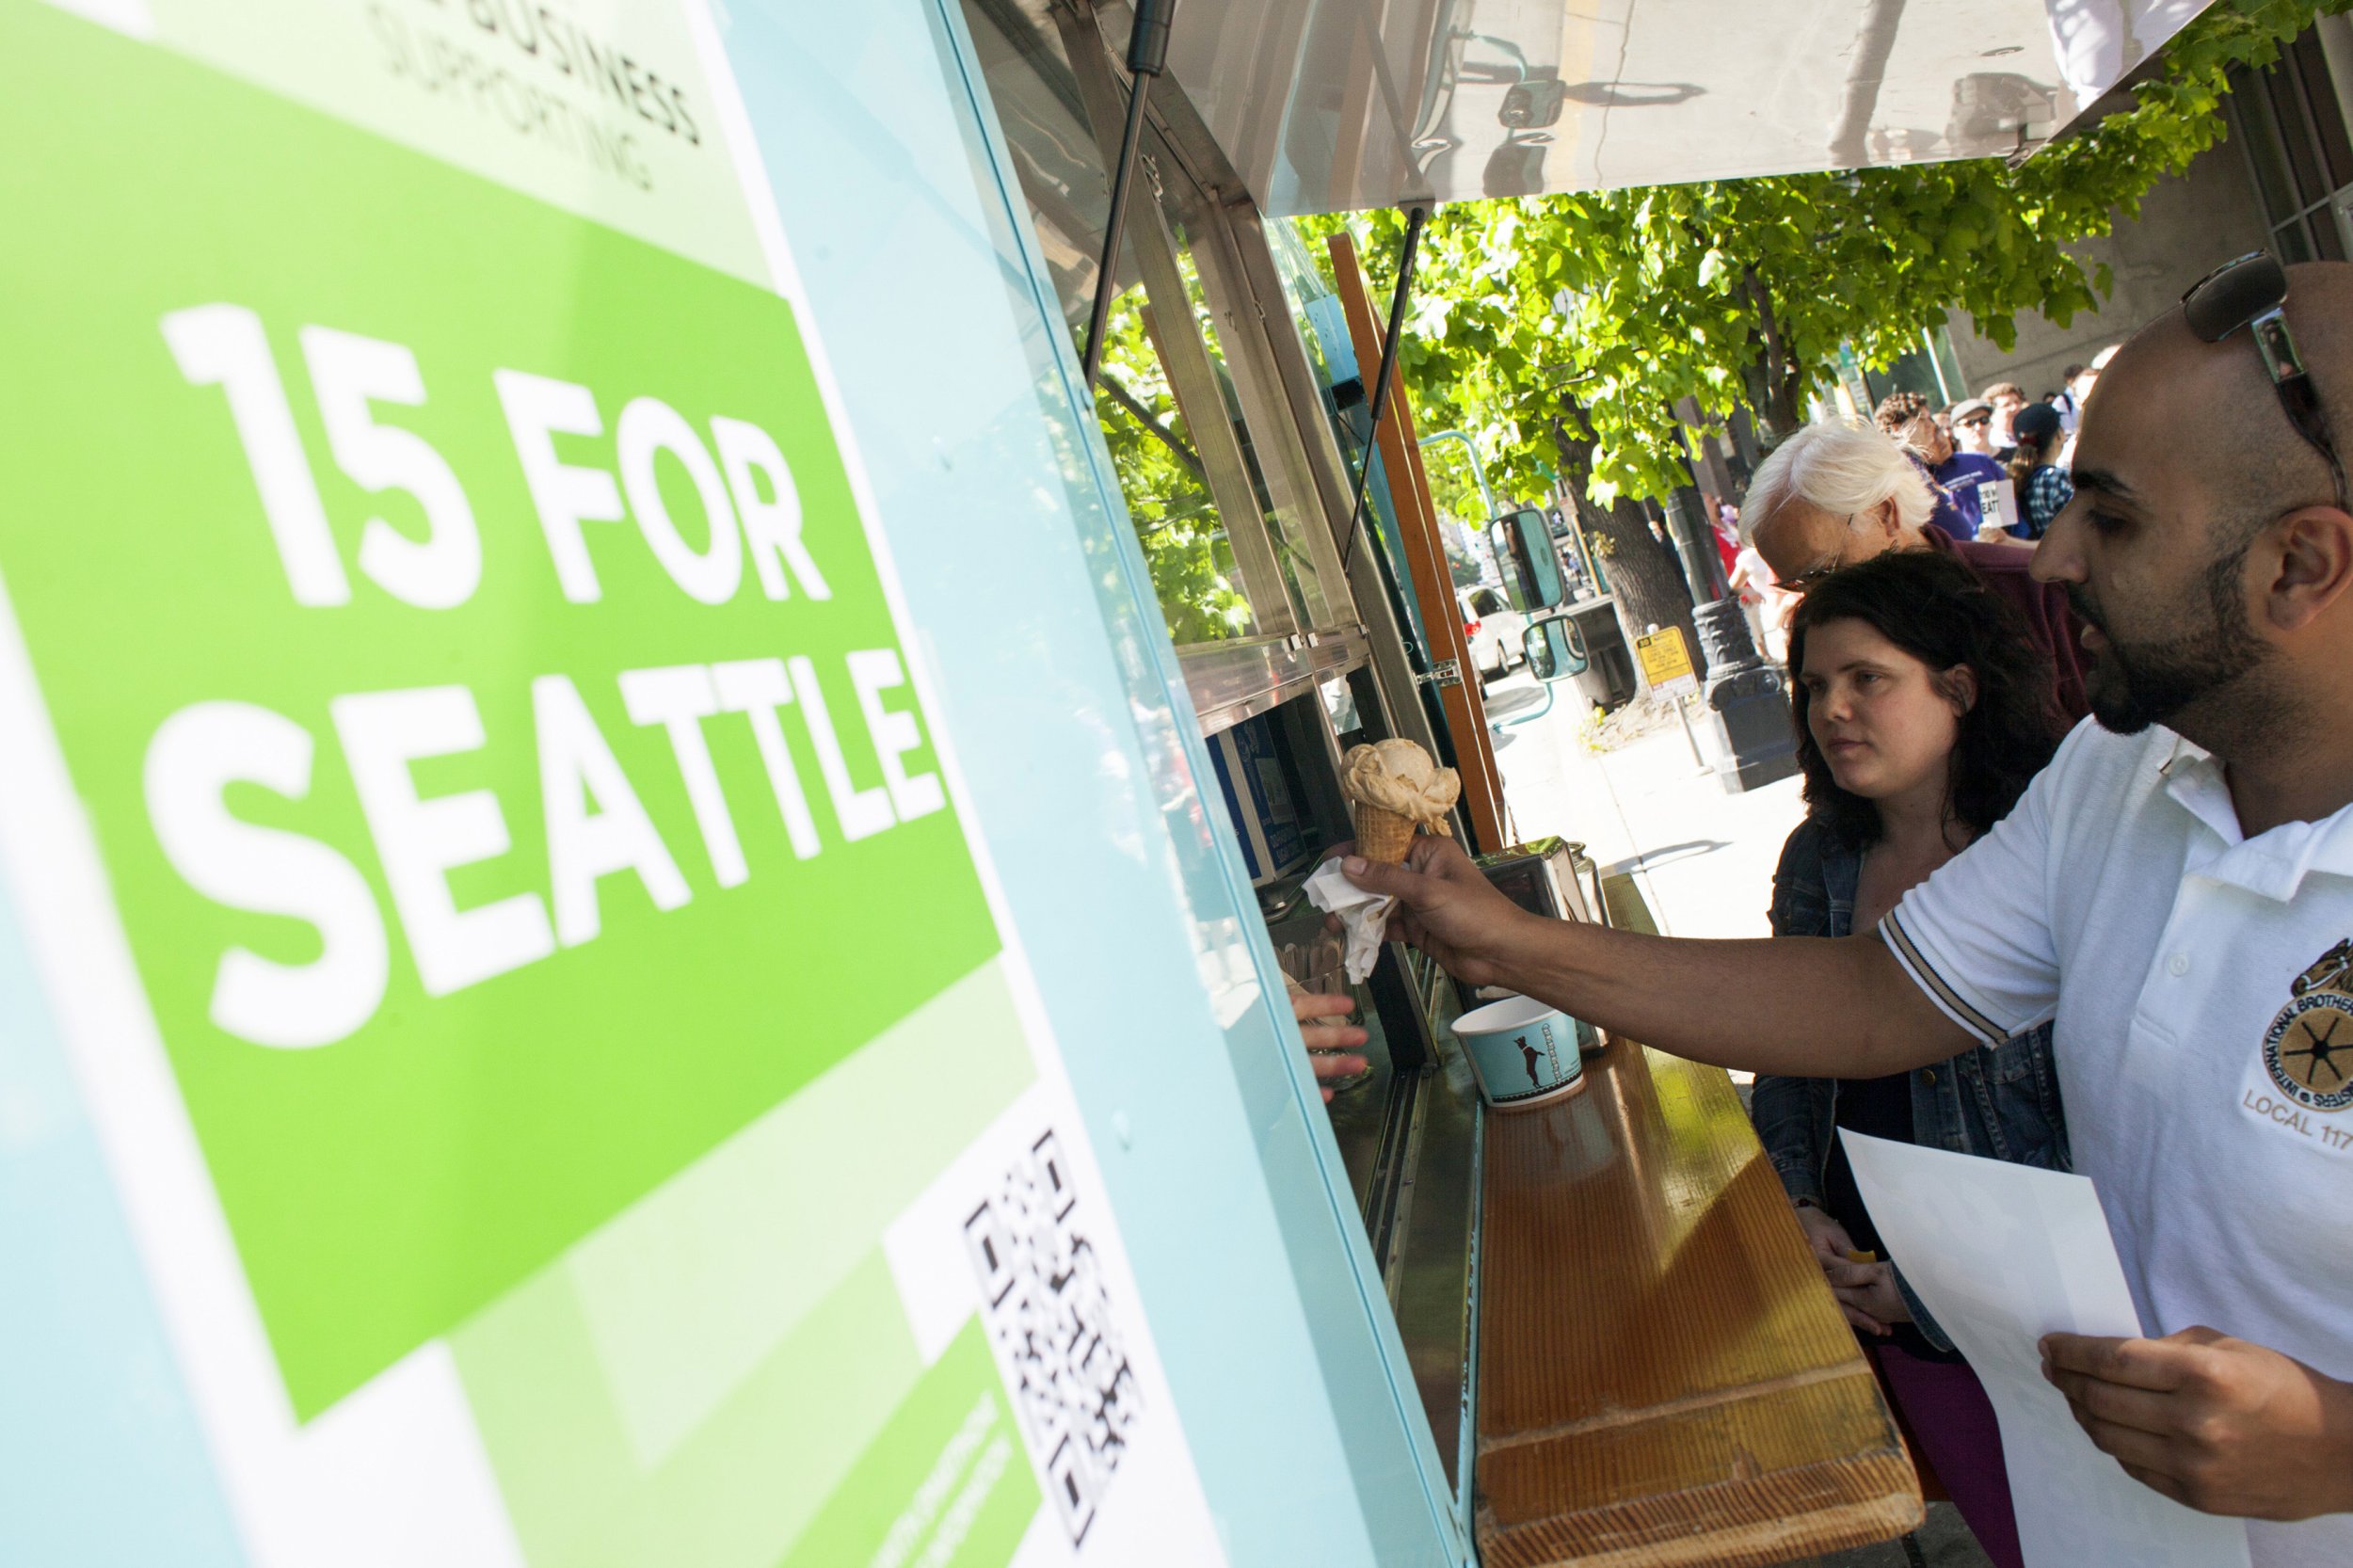 Seattle Council Unanimously Approves 15 Minimum Wage, Highest in US